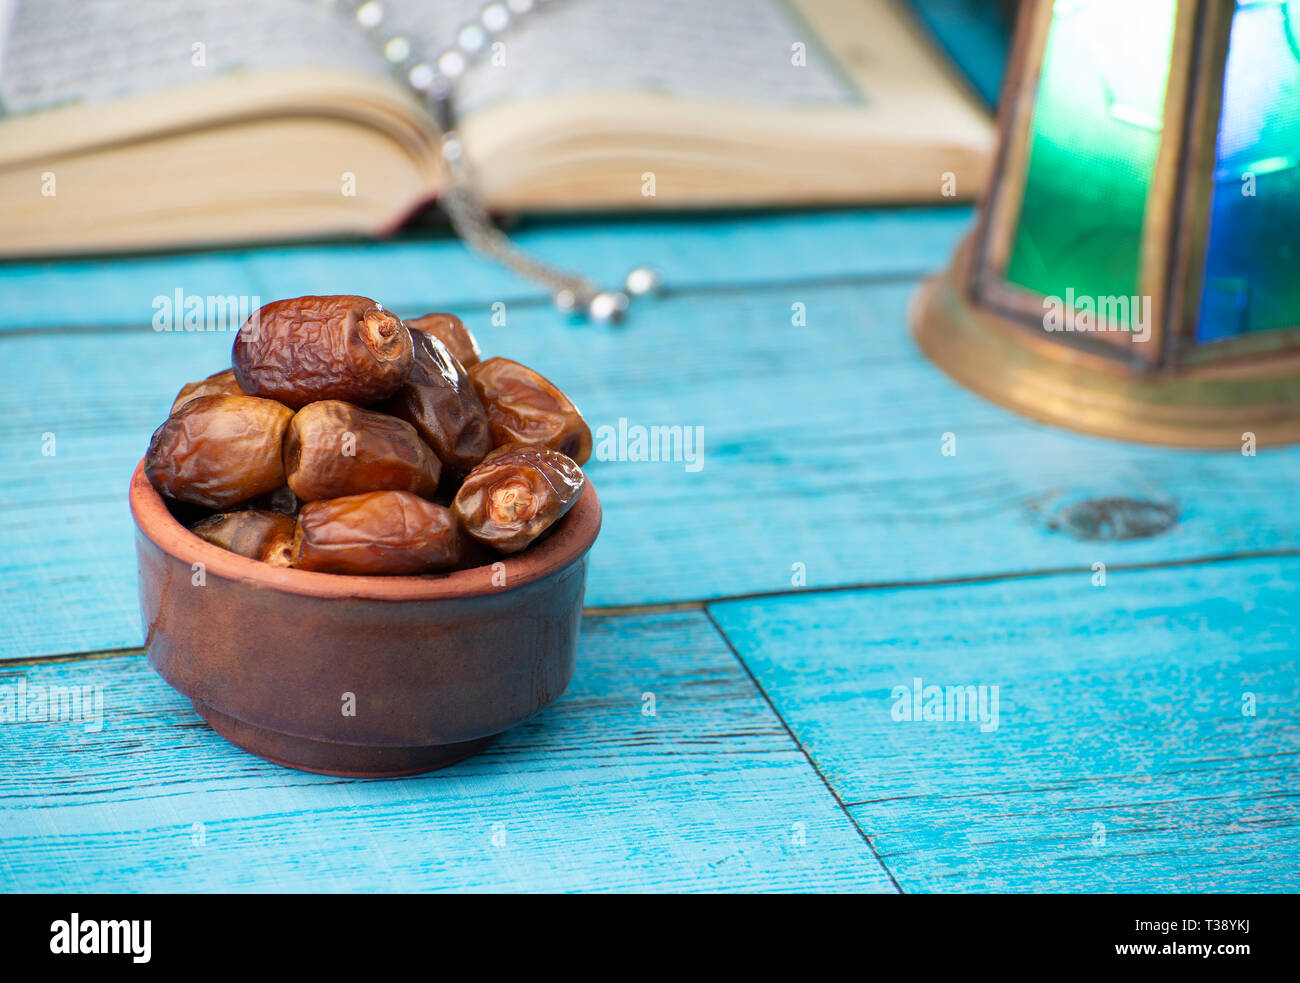 Traditional Objects of Ramadn Holy Month on Table Stock Photo